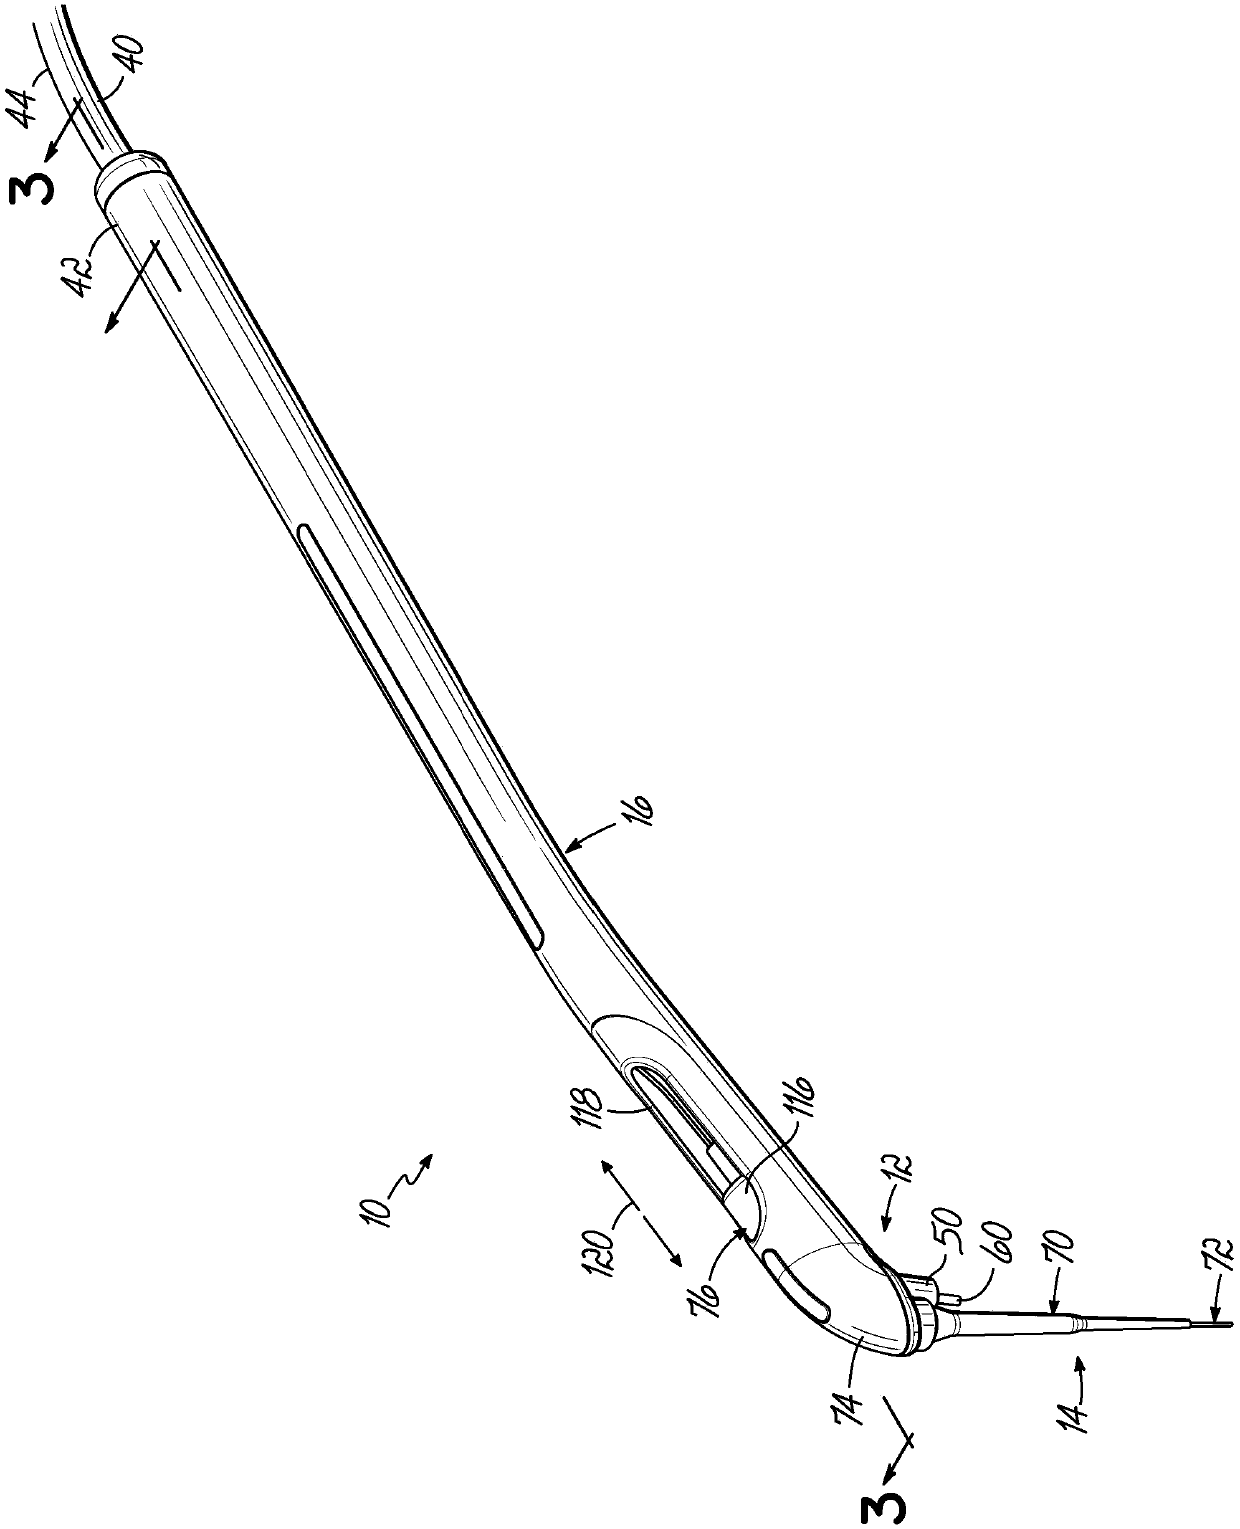 Apparatuses for evacuation of a root canal and methods of using same